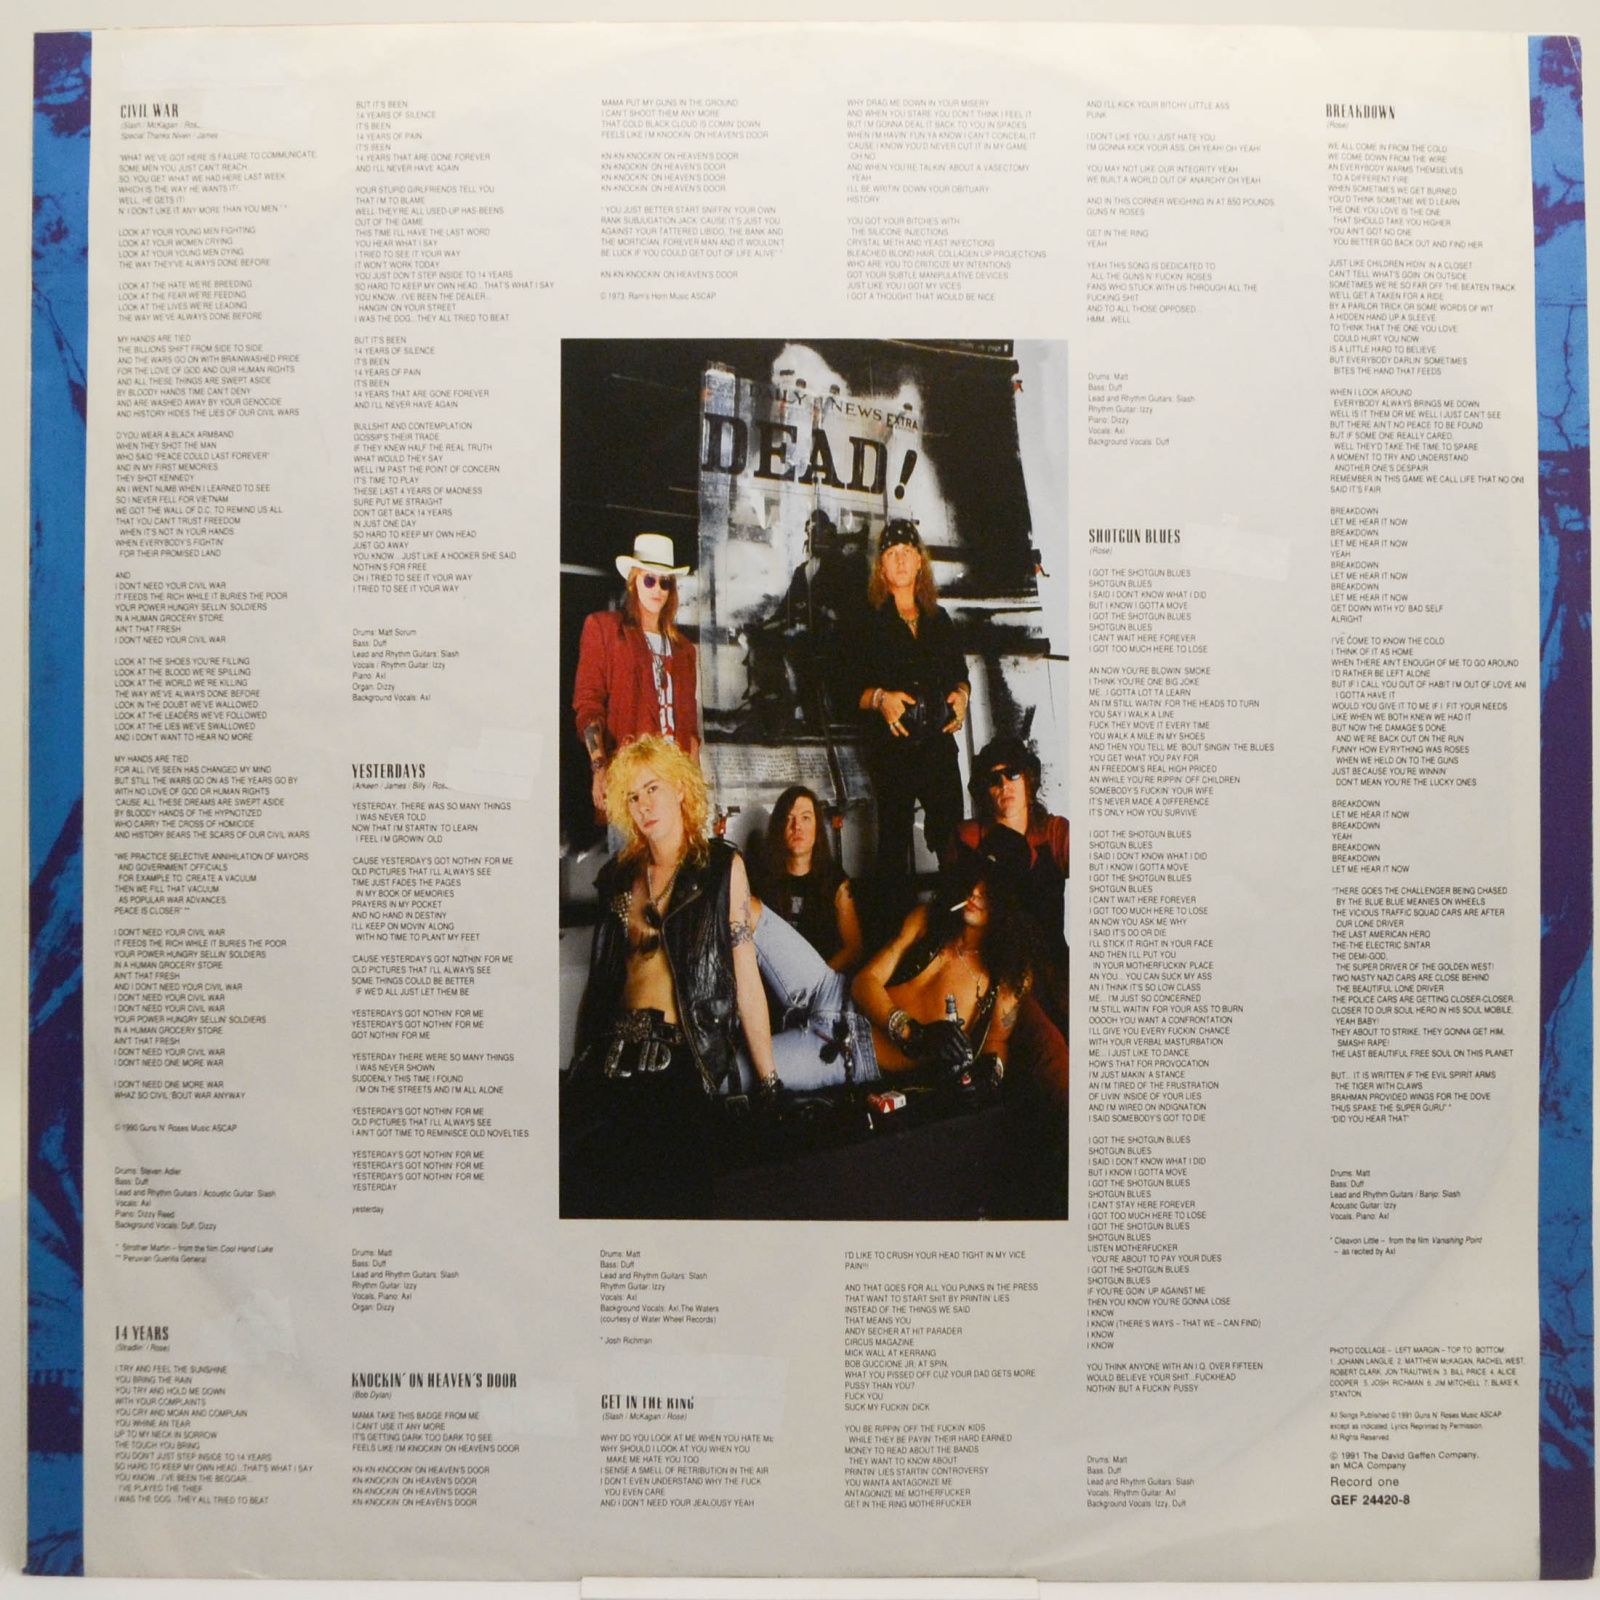 Guns N' Roses — Use Your Illusion II (2LP), 1991